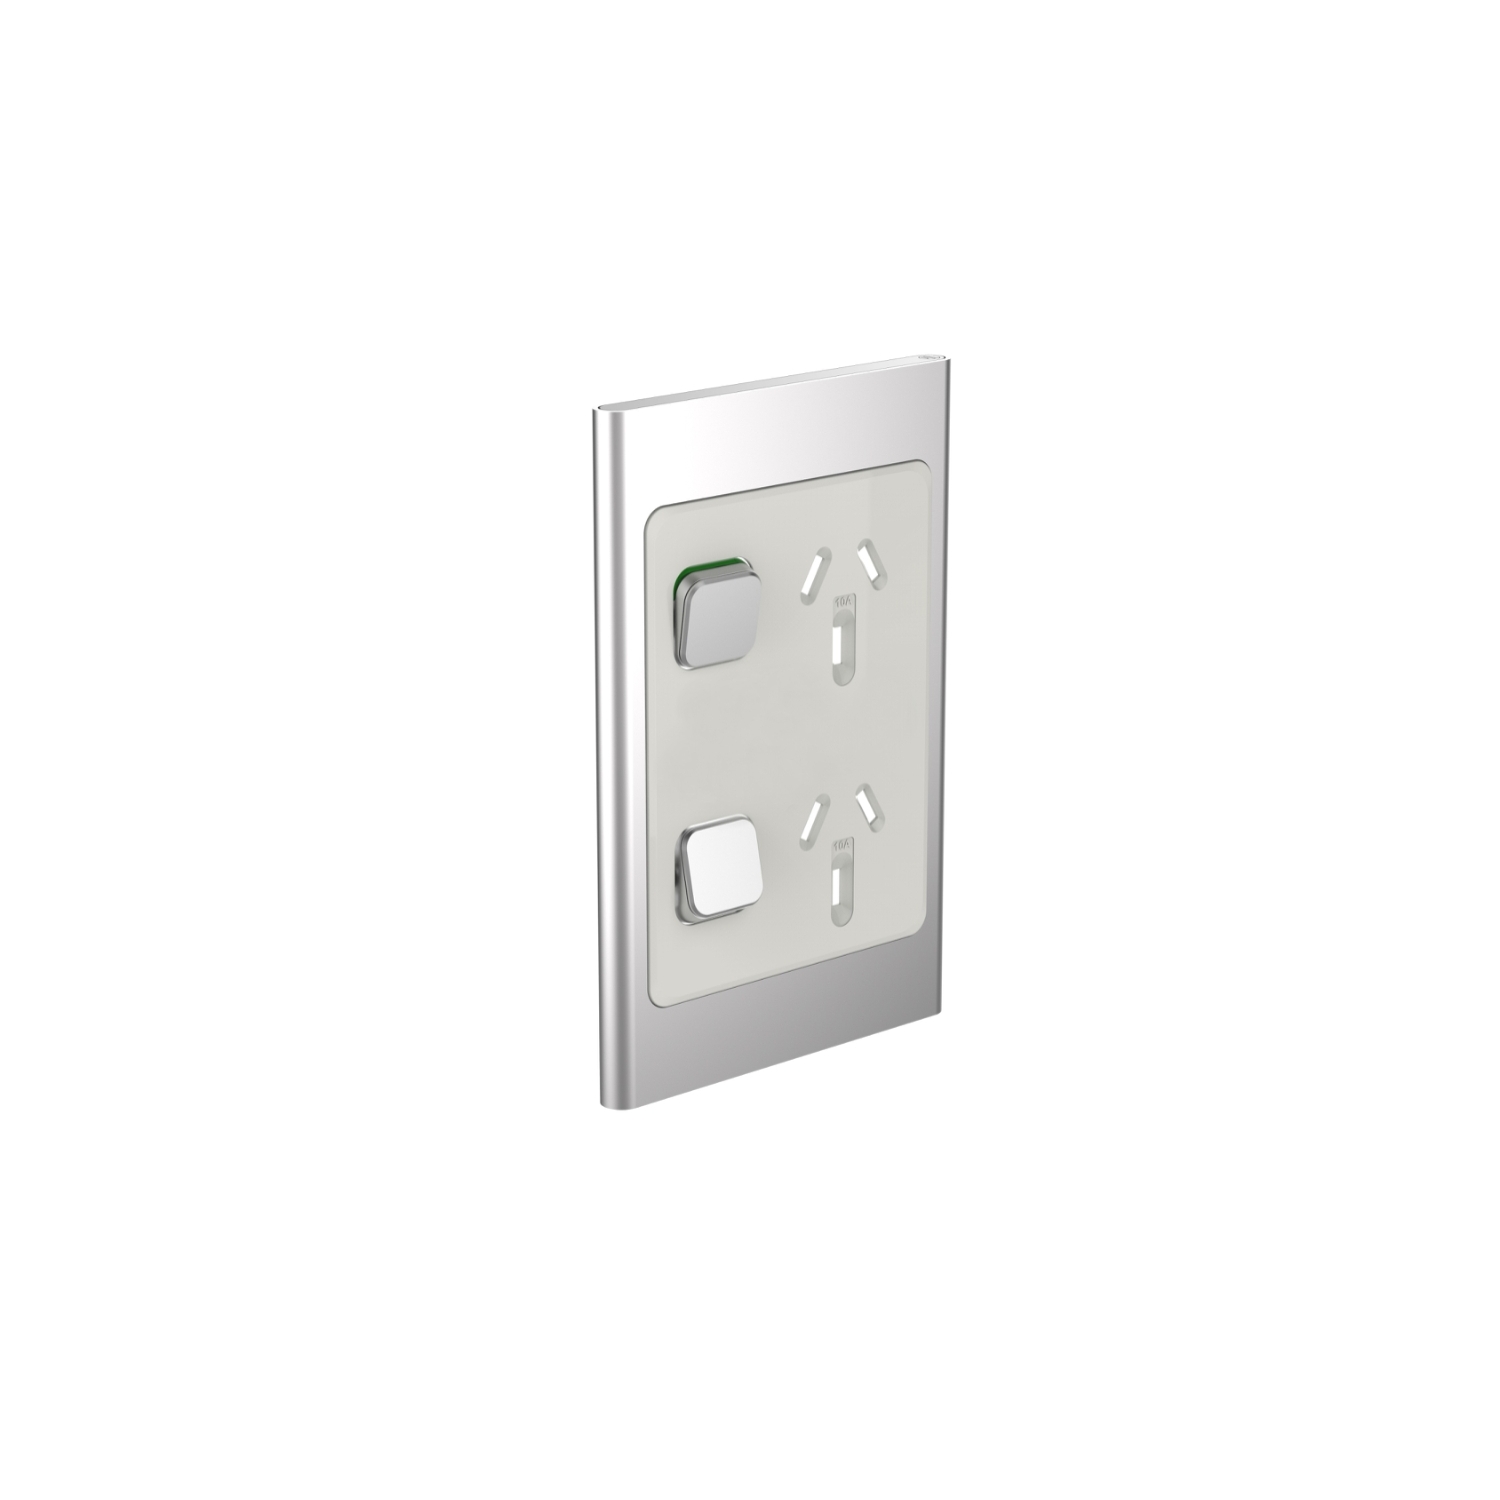 PDL Iconic Styl, cover frame, 2 switches & 2 sockets, vertical - Silver